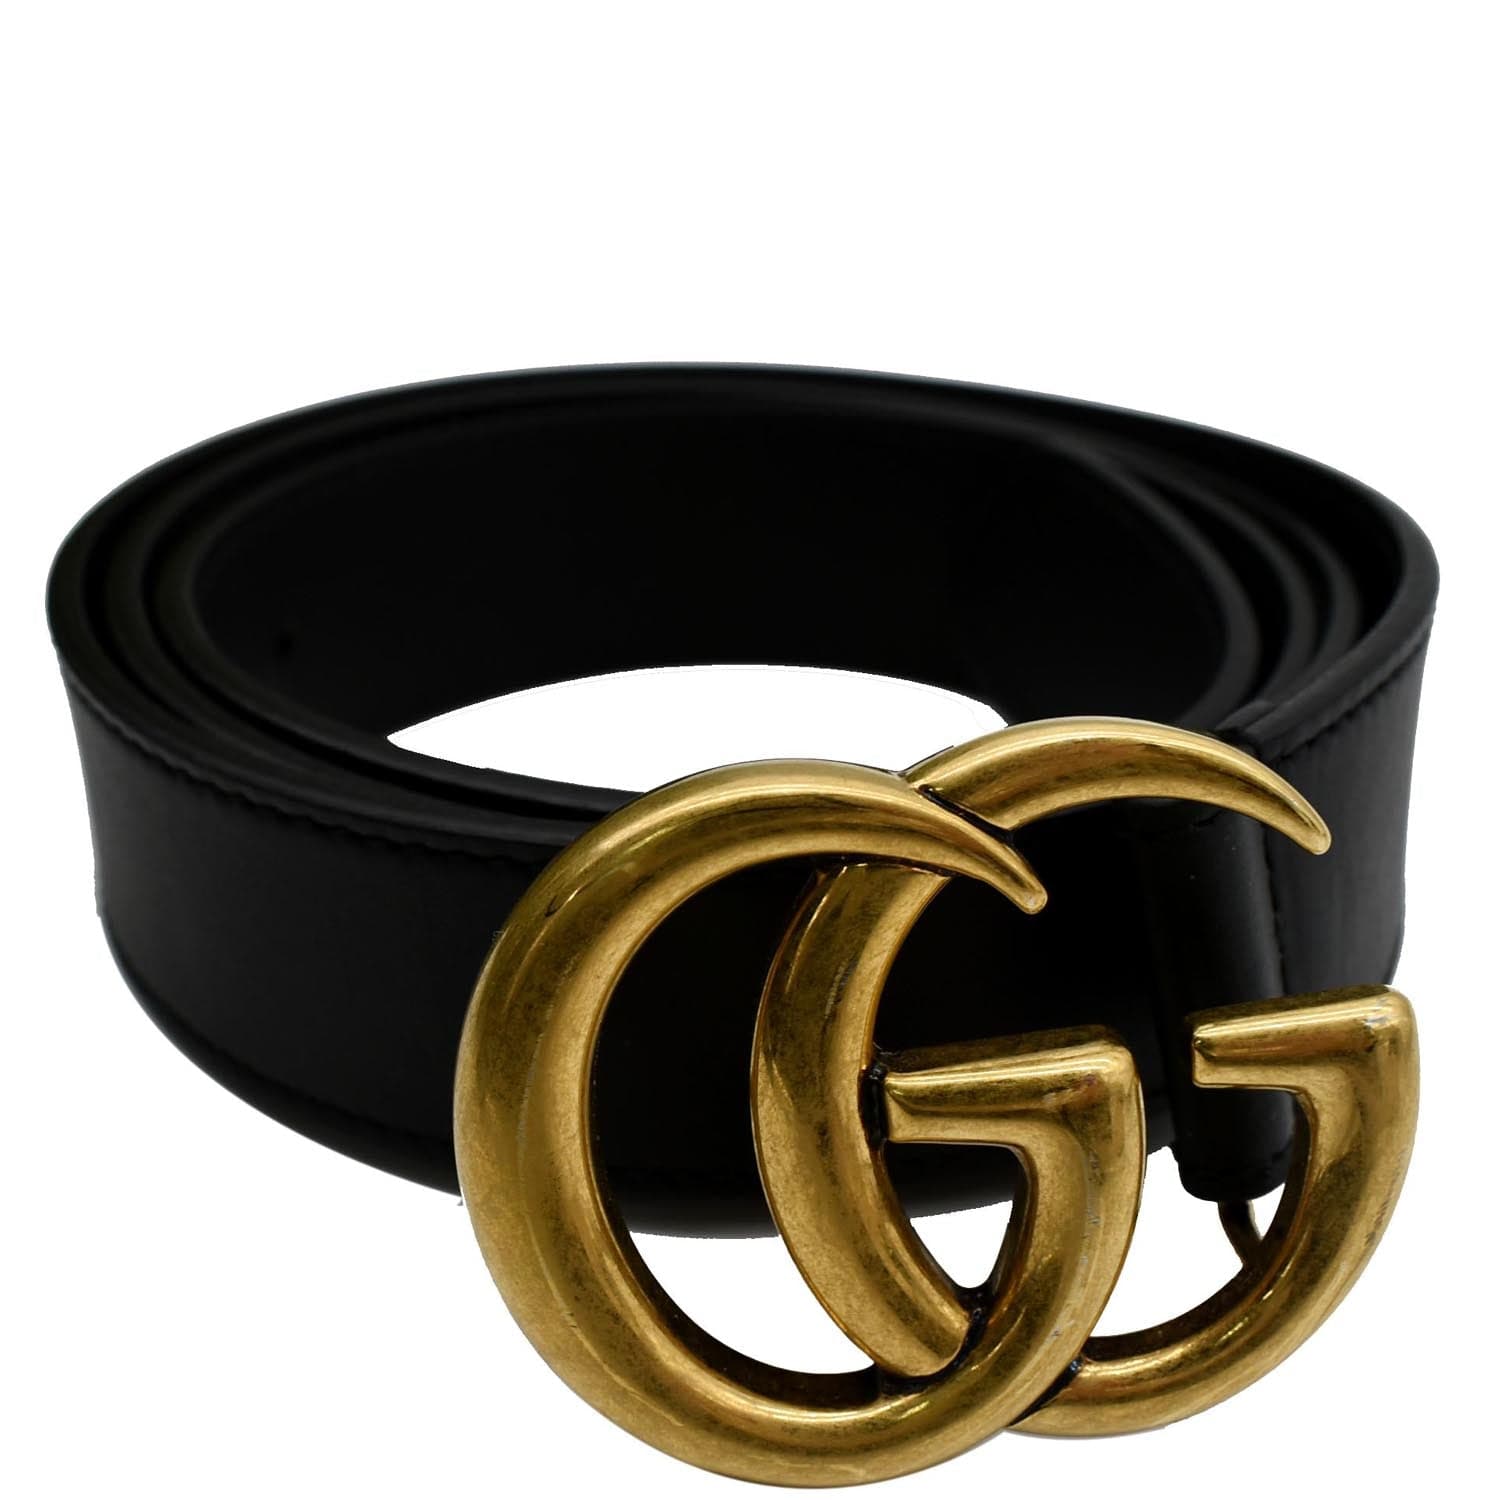 Leather Belt With Double G Buckle in Black - Gucci